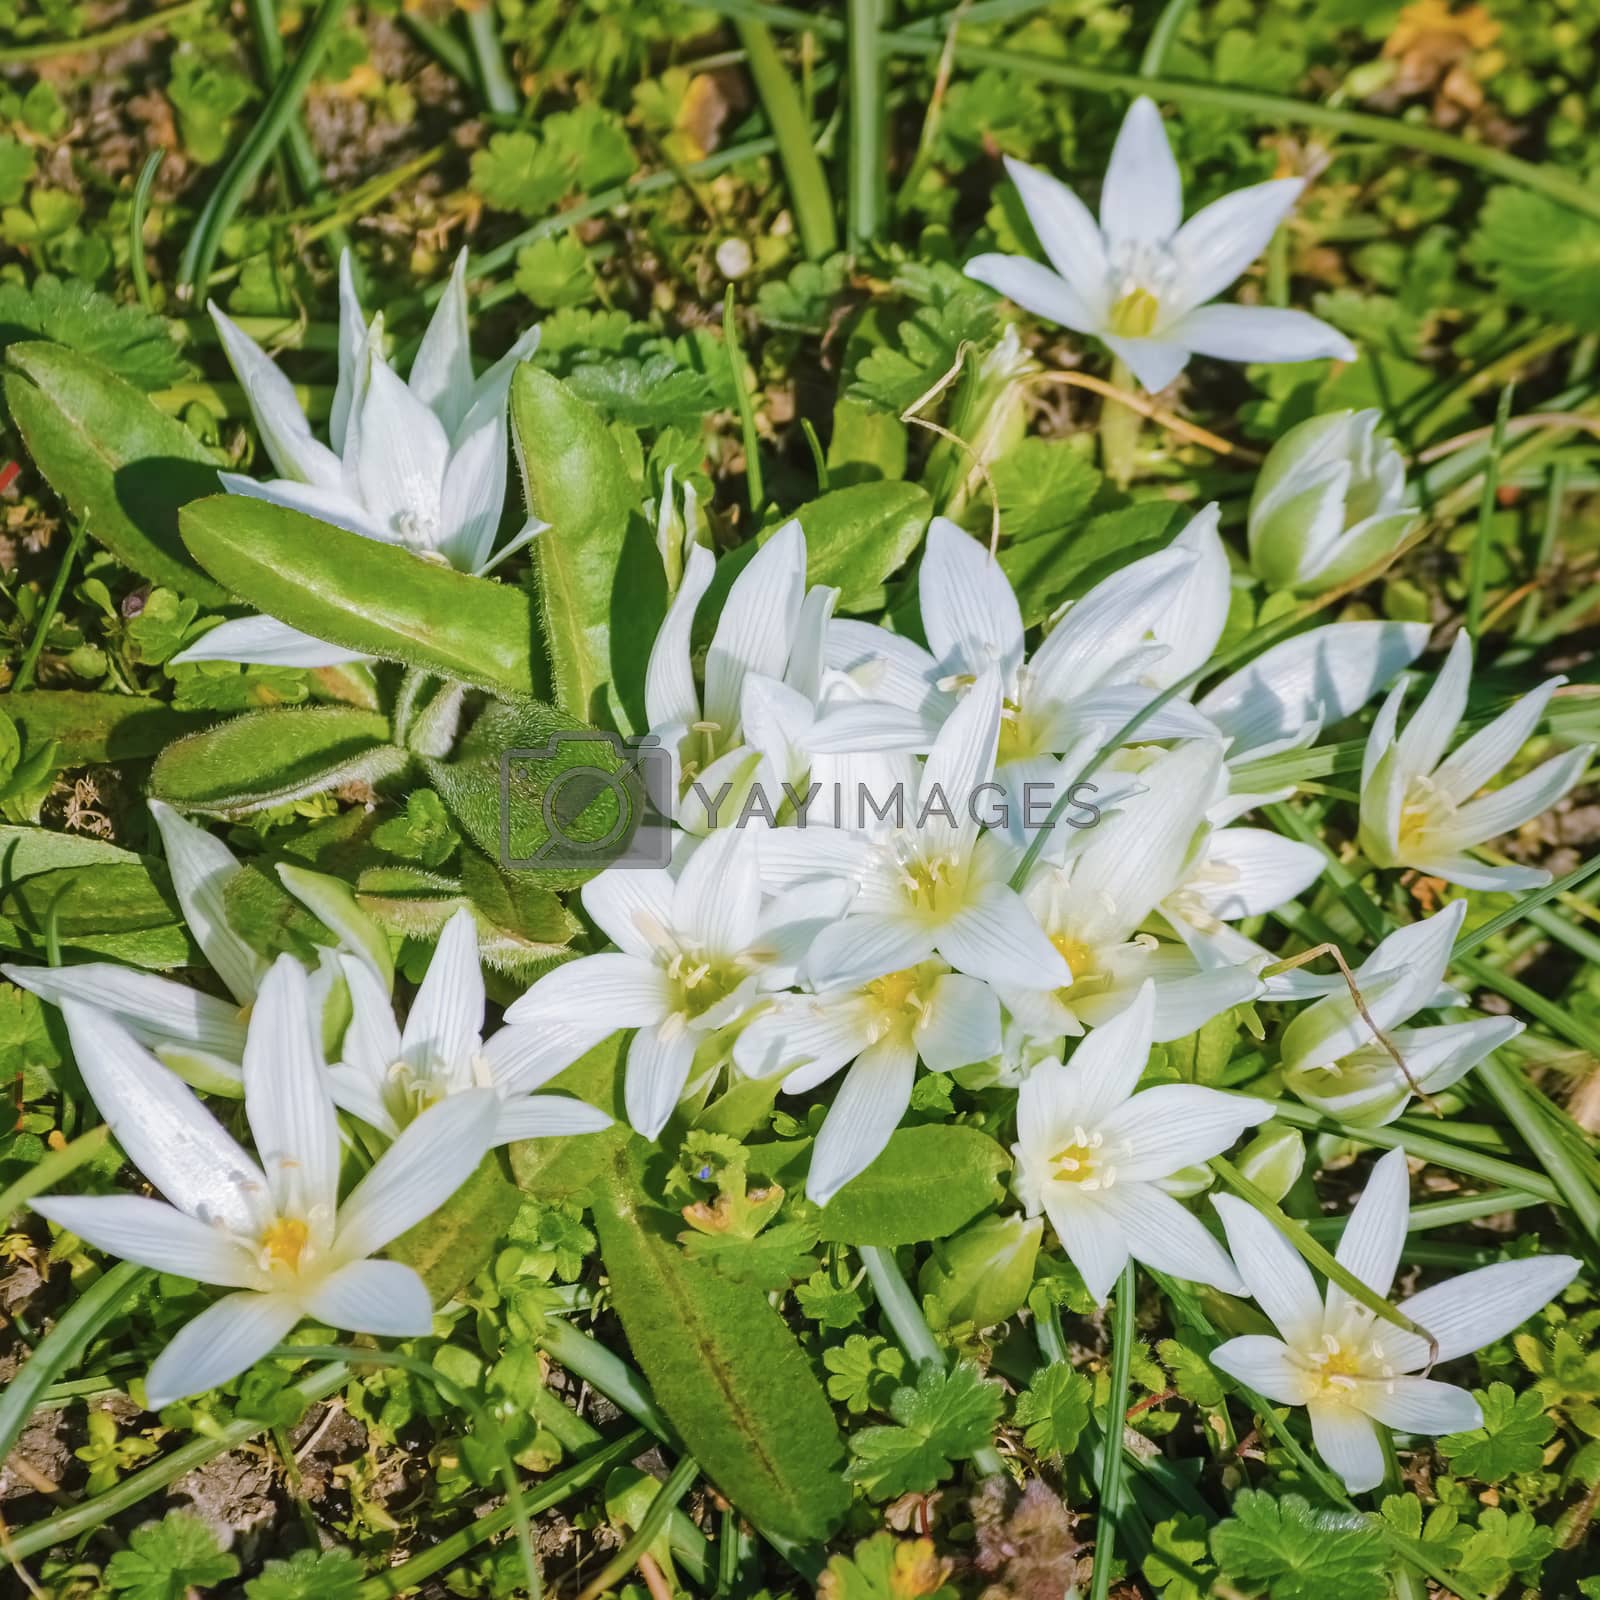 Royalty free image of Ornithogalum by SNR